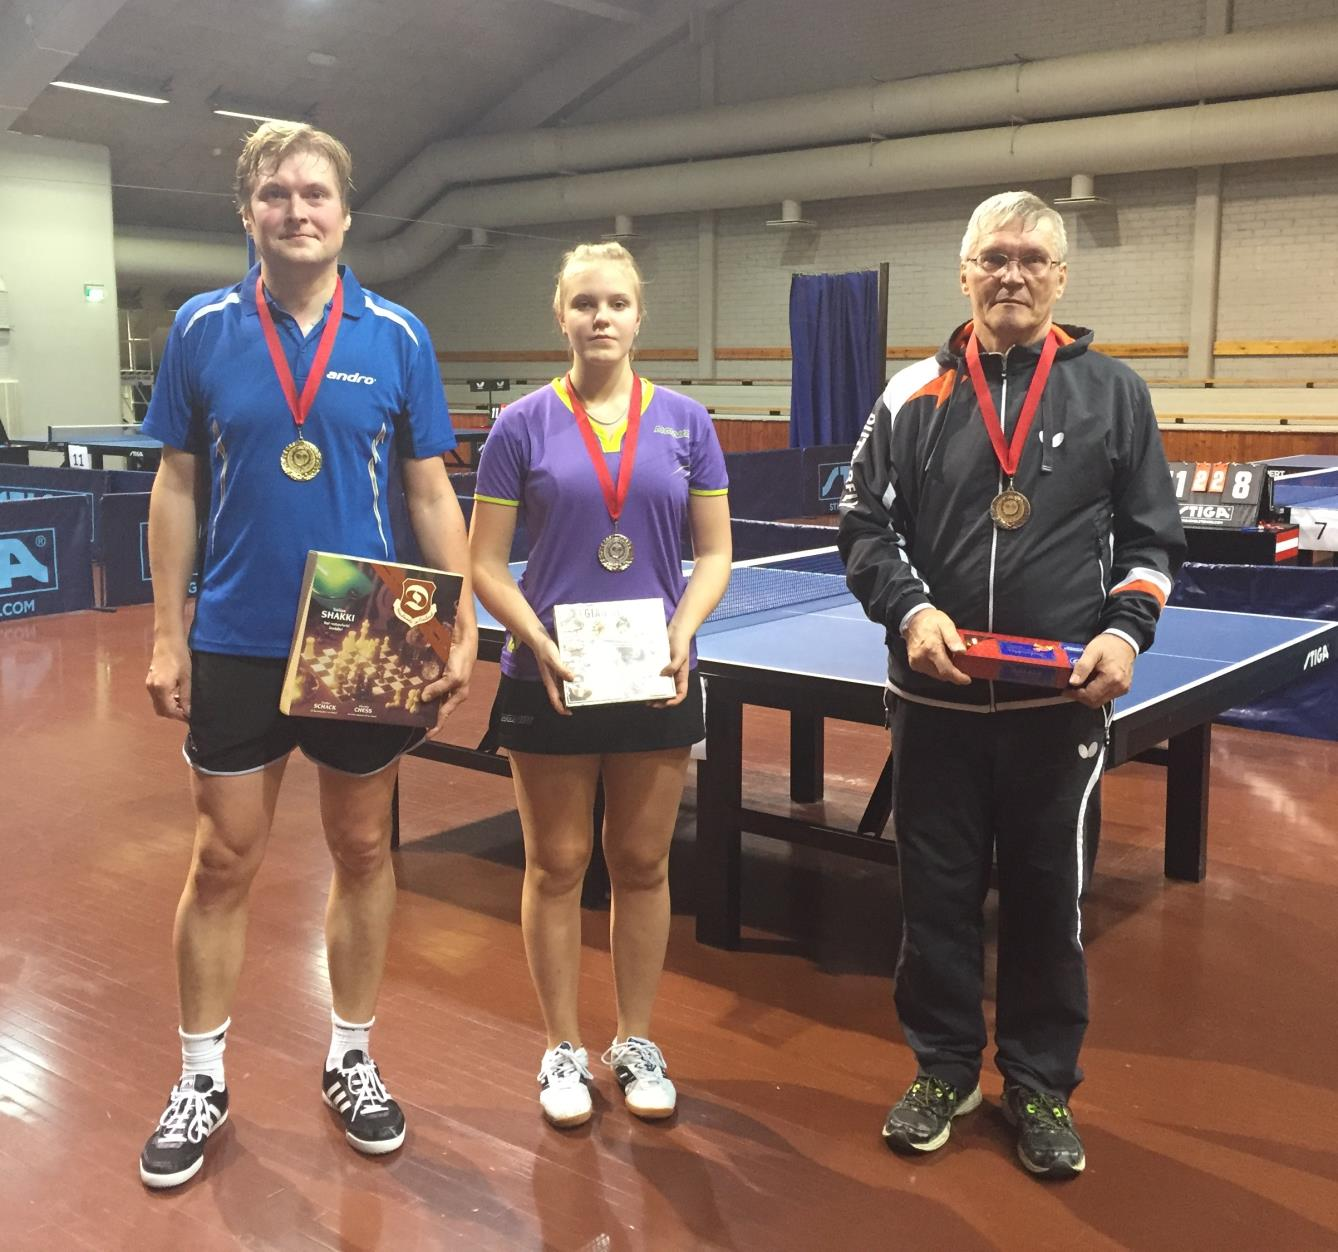 M-1600 Tero Lehtinen (on the left) won the M-1600 class. In the final he beat Hille Millert 3-1.